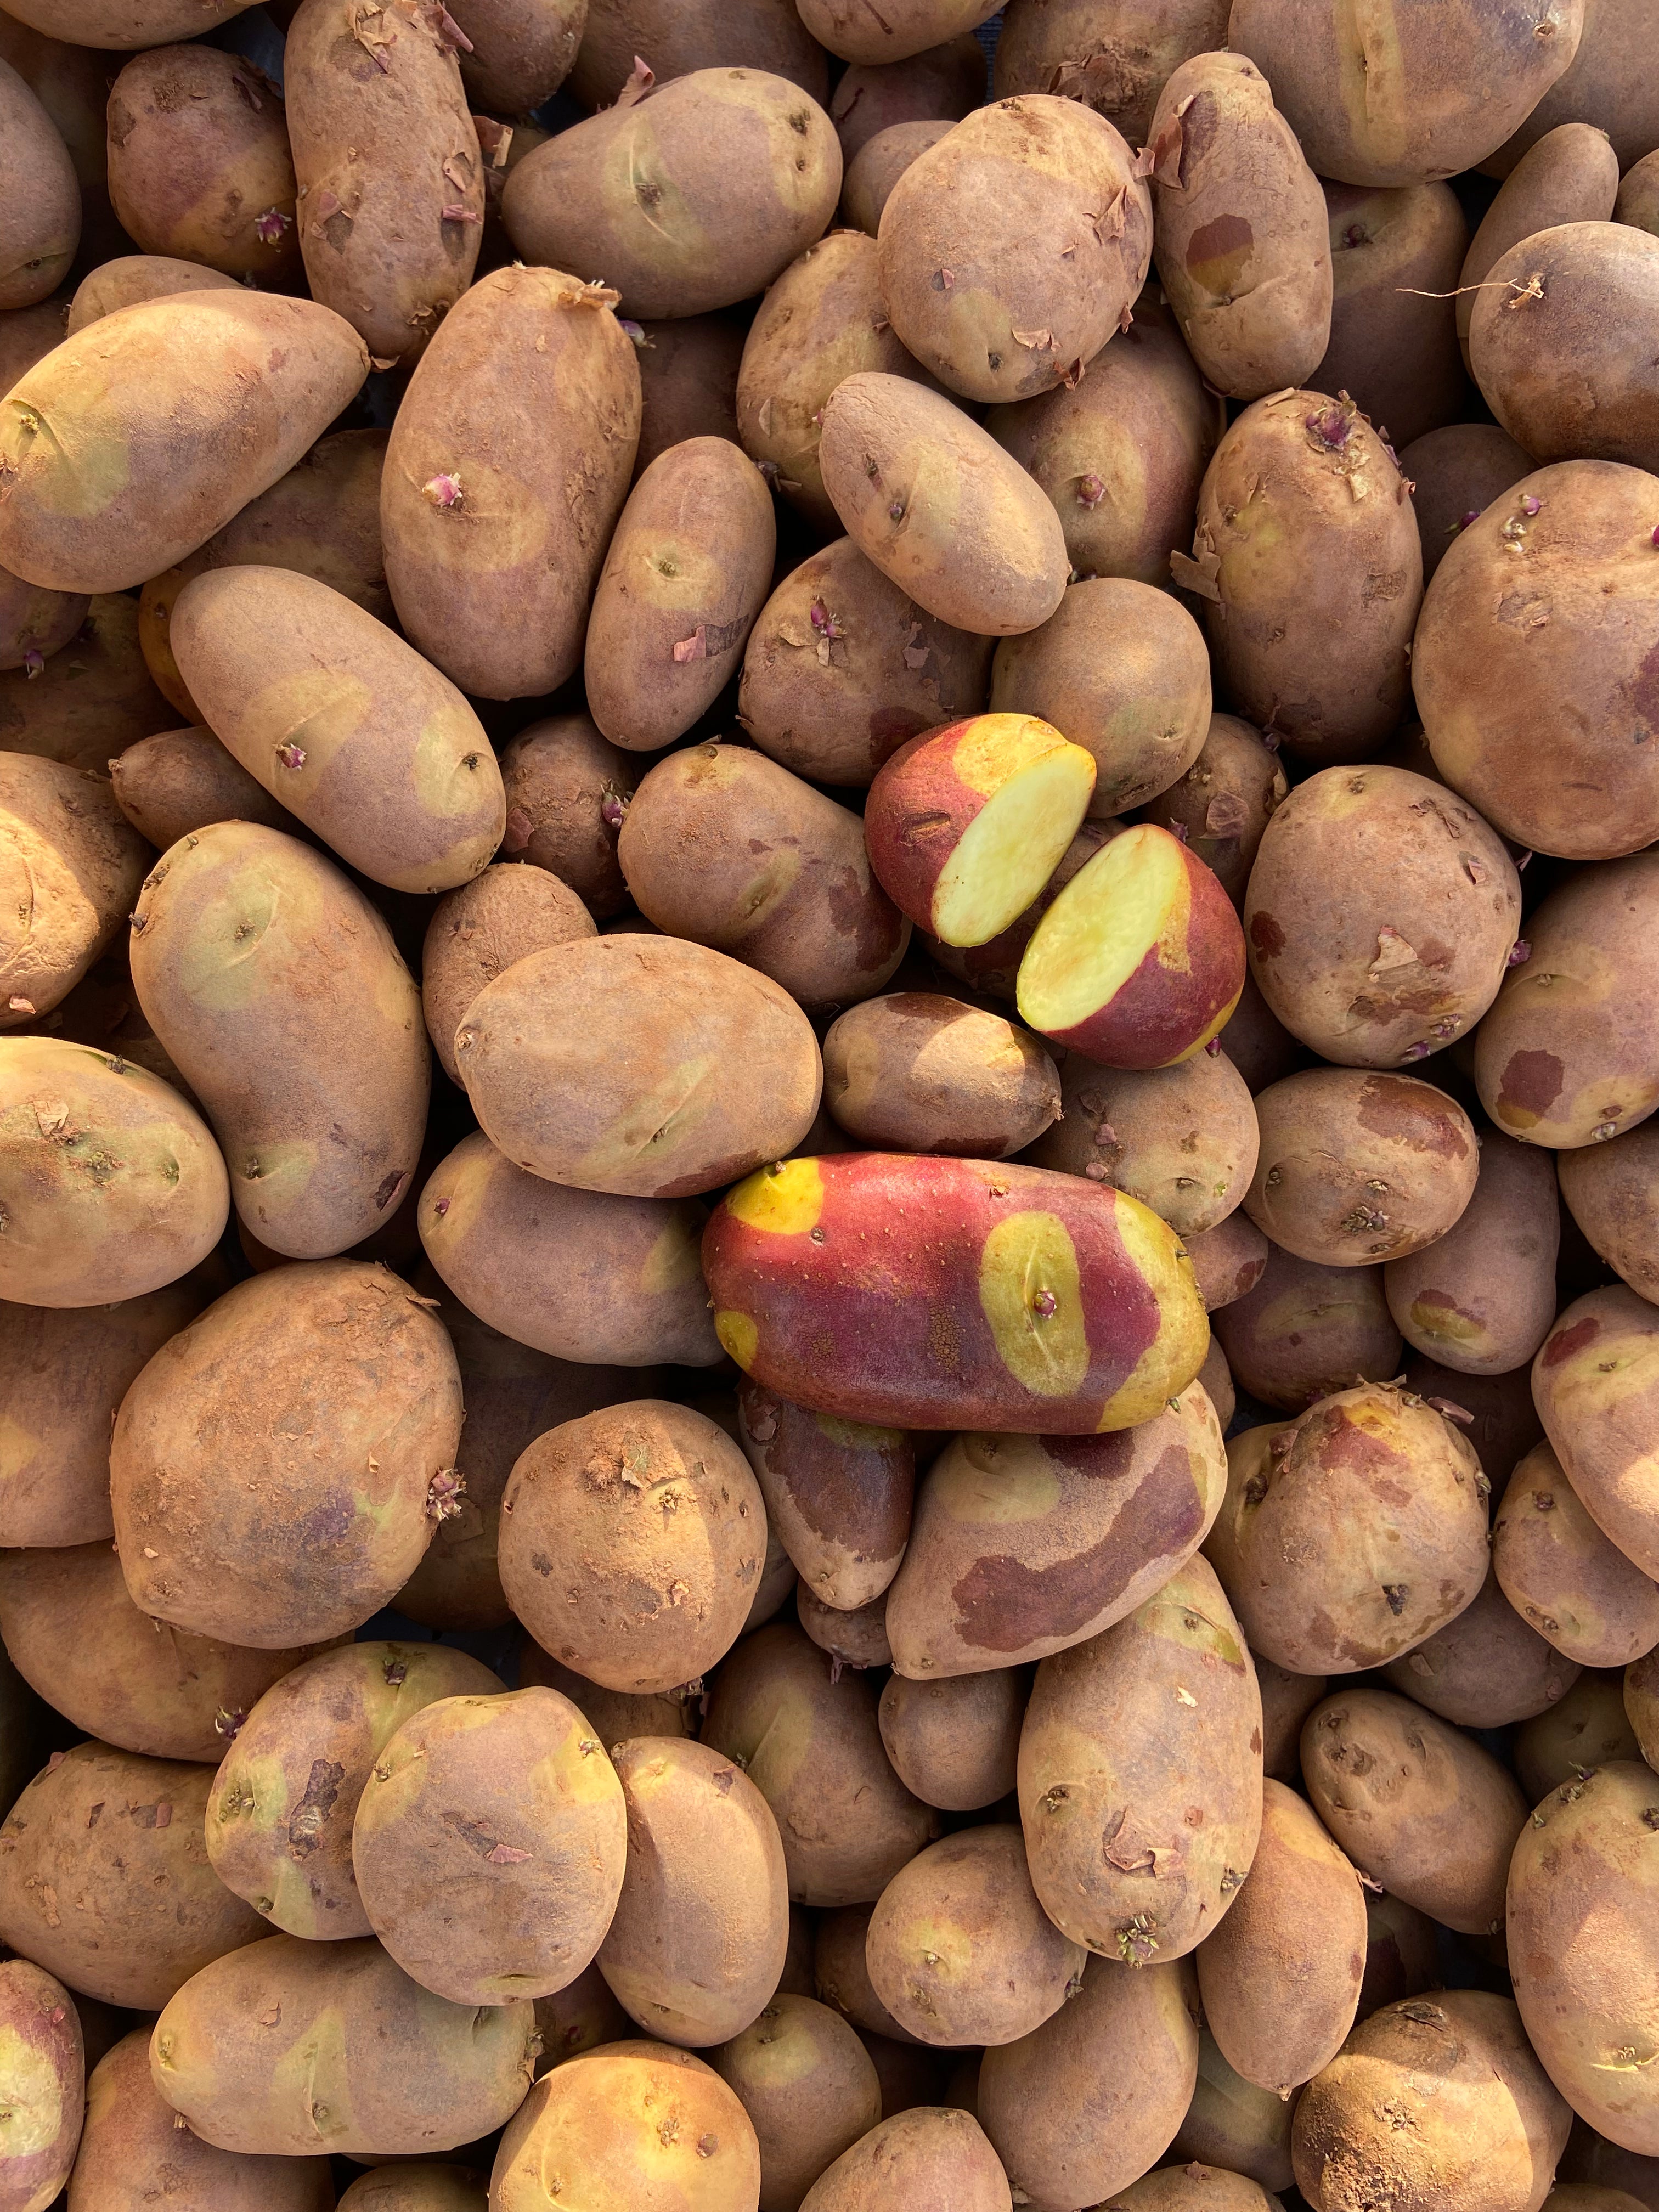 Harlequin Gold Seed Potatoes (non-commercial)